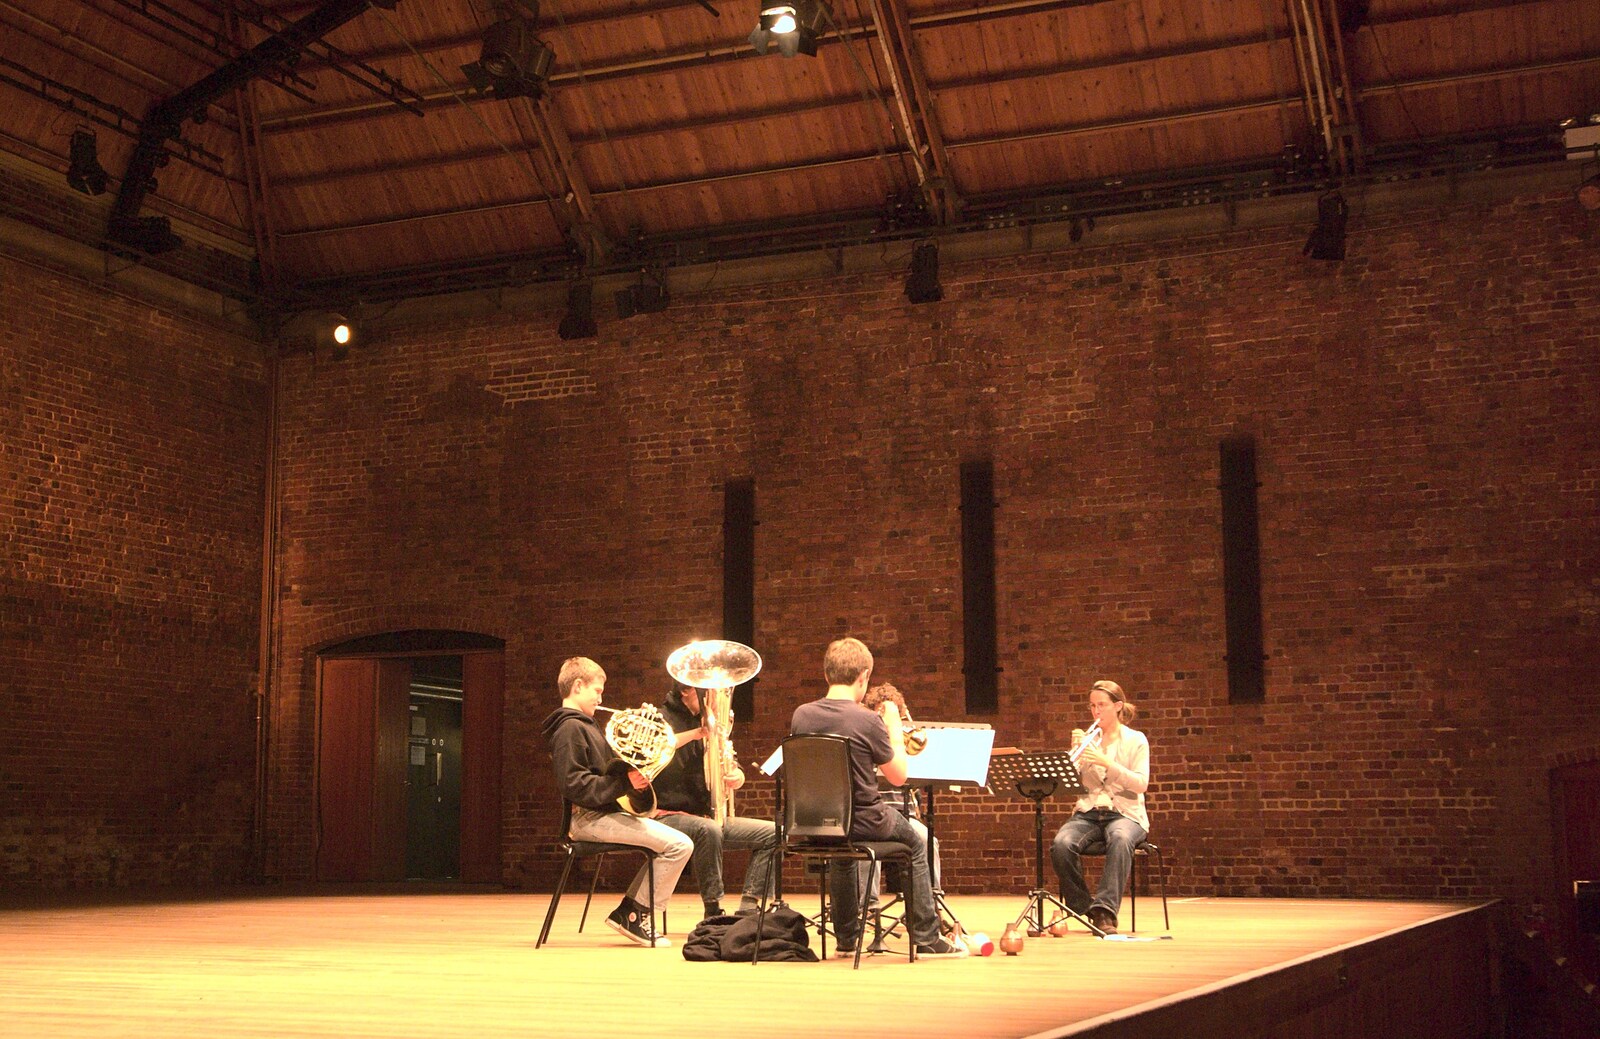 The Aldeburgh Food Festival, Snape Maltings, Suffolk - 25th September 2010: A quintet practices its thing